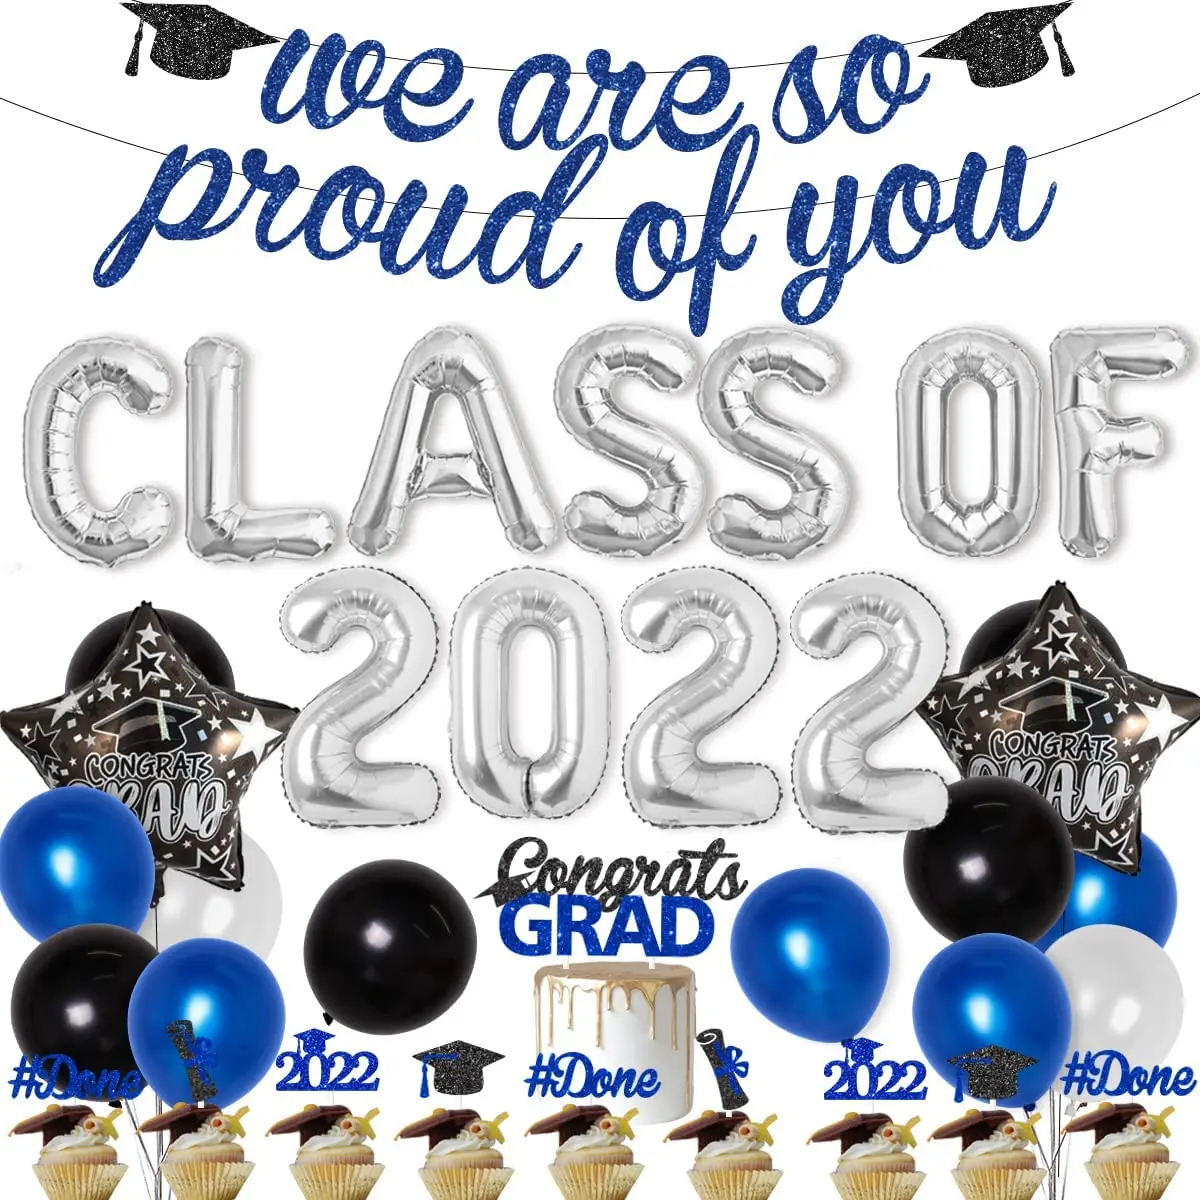 

CHEEREVEAL Blue Sliver Balloon Set We Are So Proud of You Banner Congrats Grad Cake Toppers 2022 Graduation Party Decorations